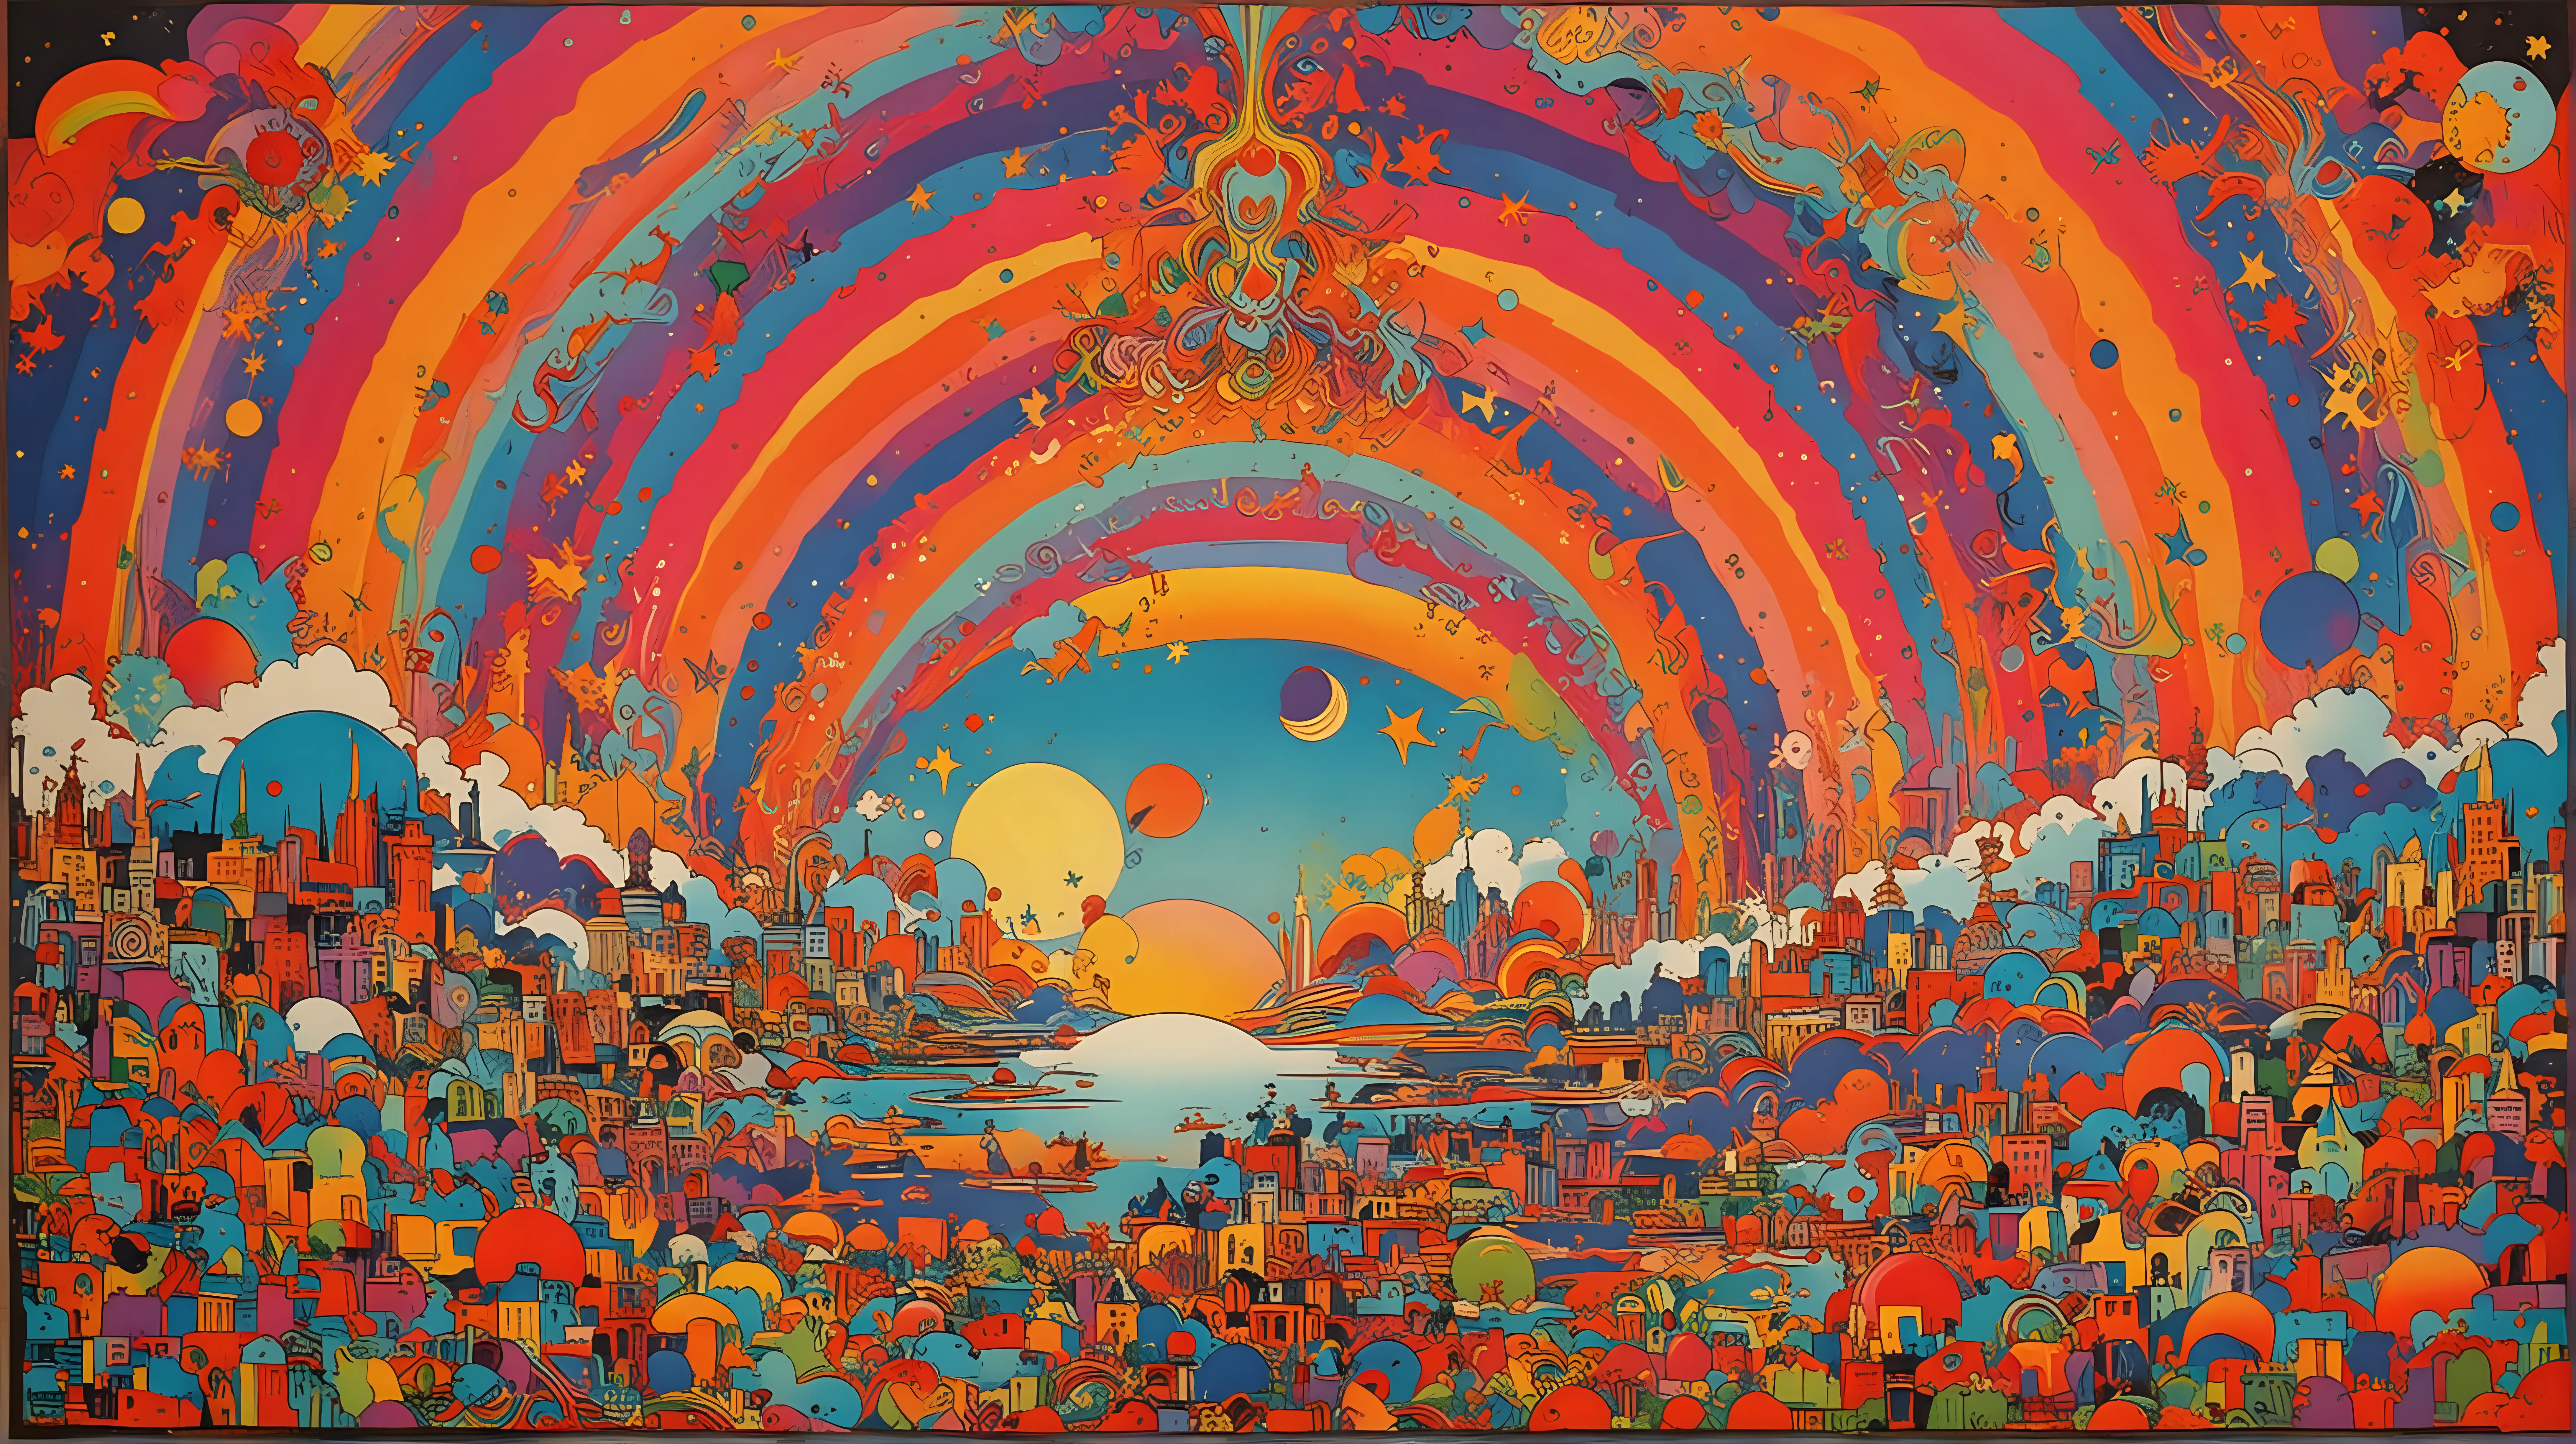 Colorful 1960s Psychedelic Concert Poster in Peter Max Style